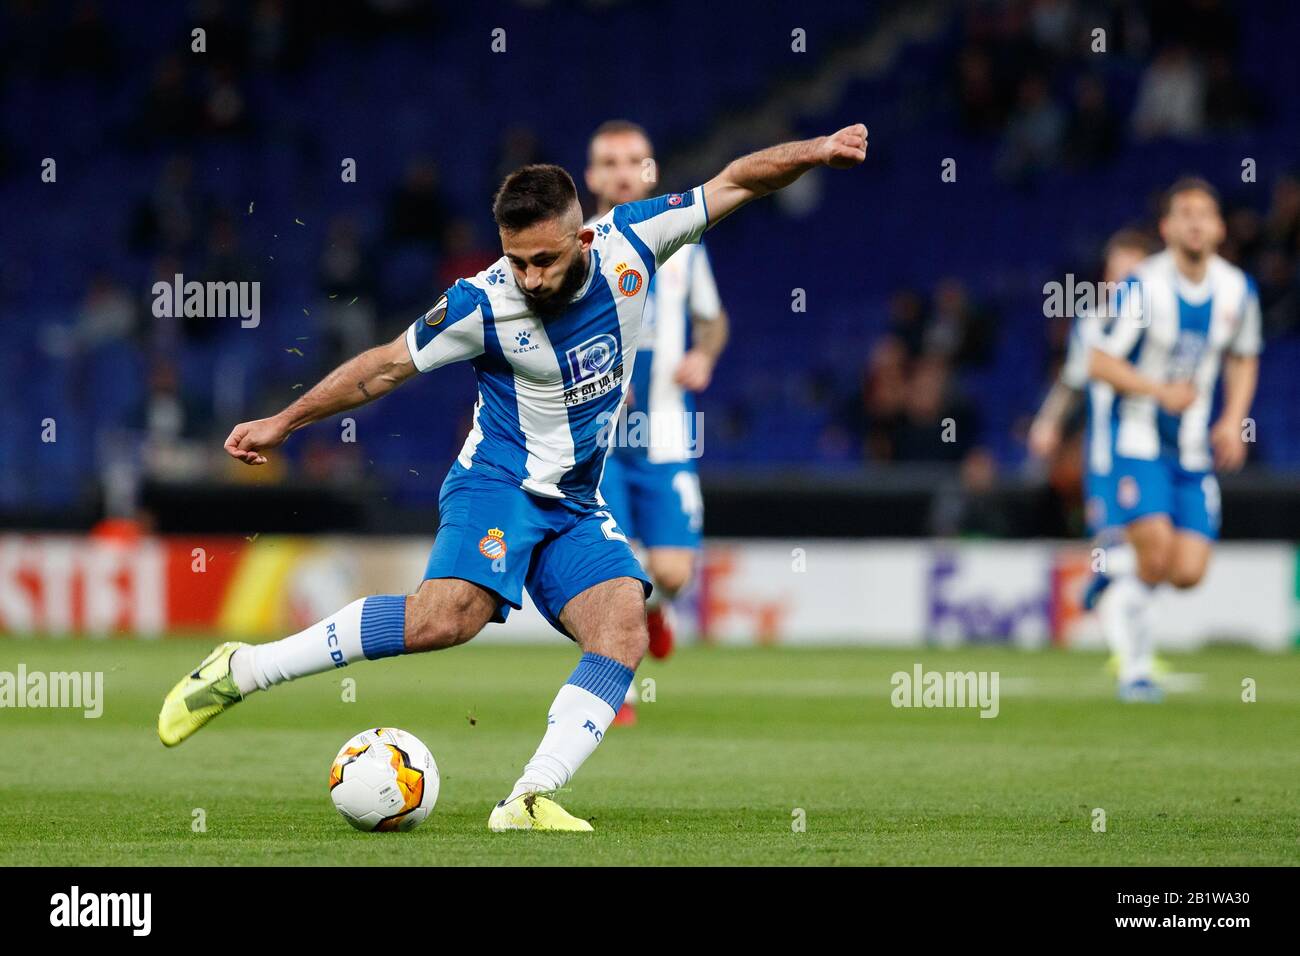 Barcelona, Spain. 27th Feb 2020.  Matias Vargas of RCD Espanyol during the UEFA Europa League round of 32 second leg match between RCD Espanyol and Wolverhampton Wanderers at RCD Stadium on February 27, 2020 in Barcelona, Spain. Credit: Dax Images/Alamy Live News Stock Photo